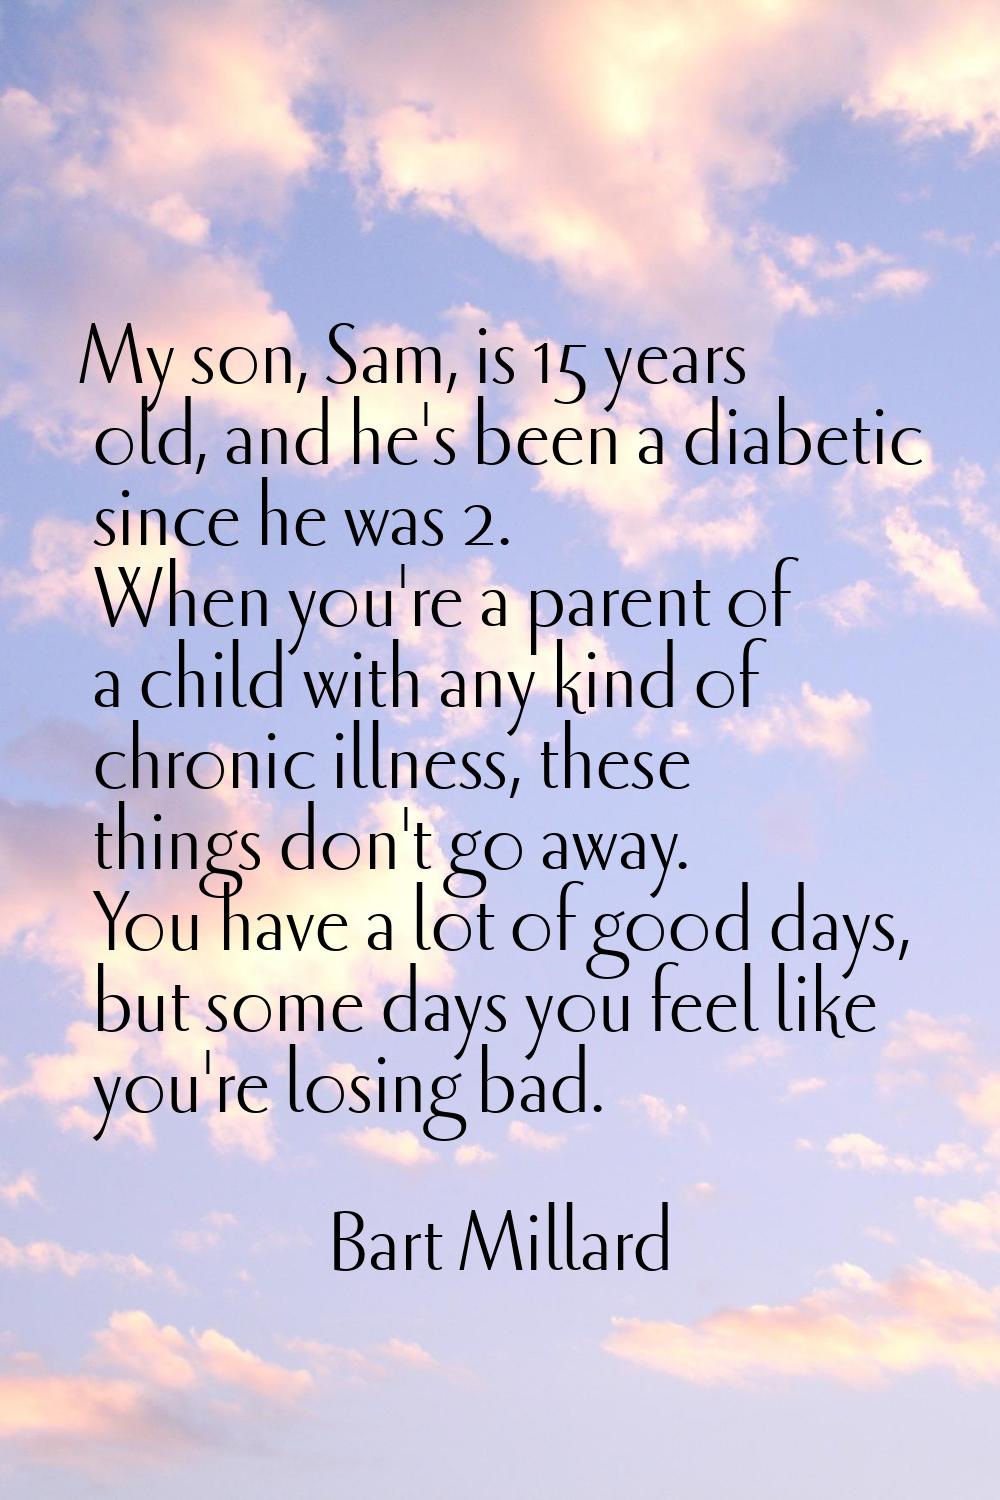 My son, Sam, is 15 years old, and he's been a diabetic since he was 2. When you're a parent of a ch